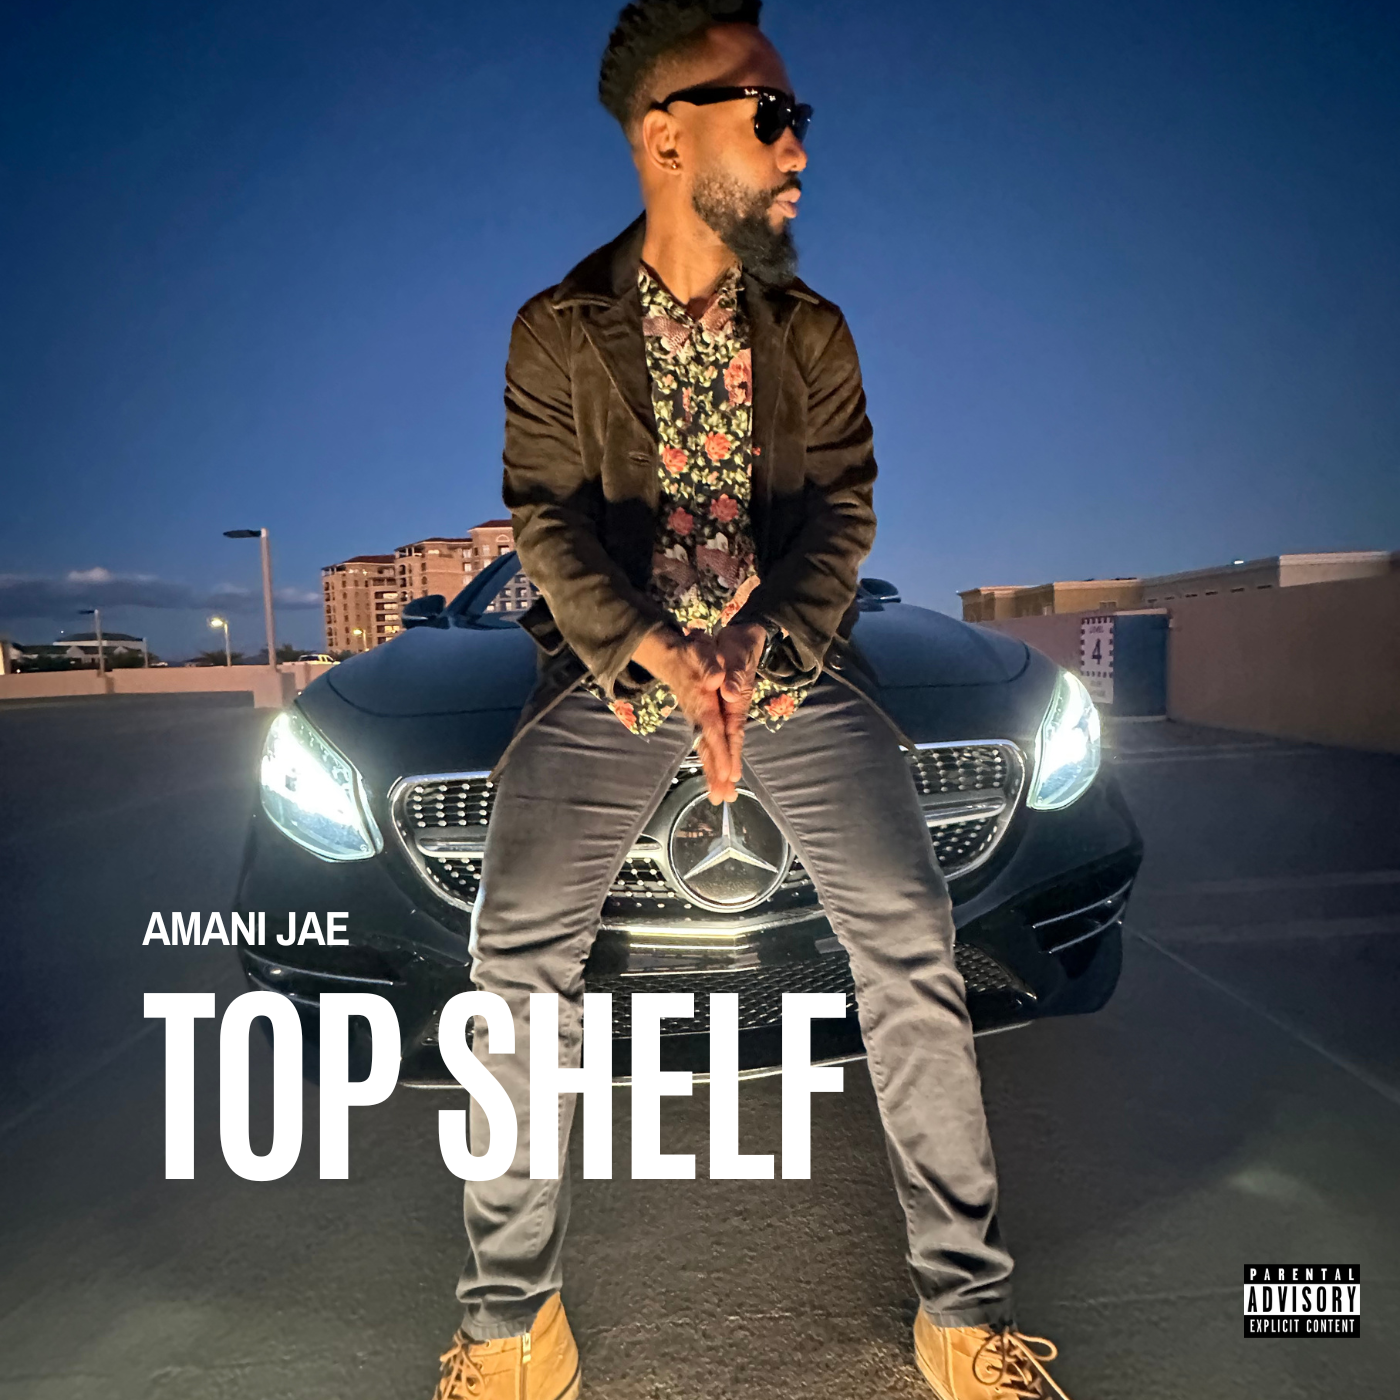 Cover photo of Amani Jae's new single Top Shelf with Amani standing in front of a black car wearing brown boots, grey jeans, brown jacket, and dark sunglasses.